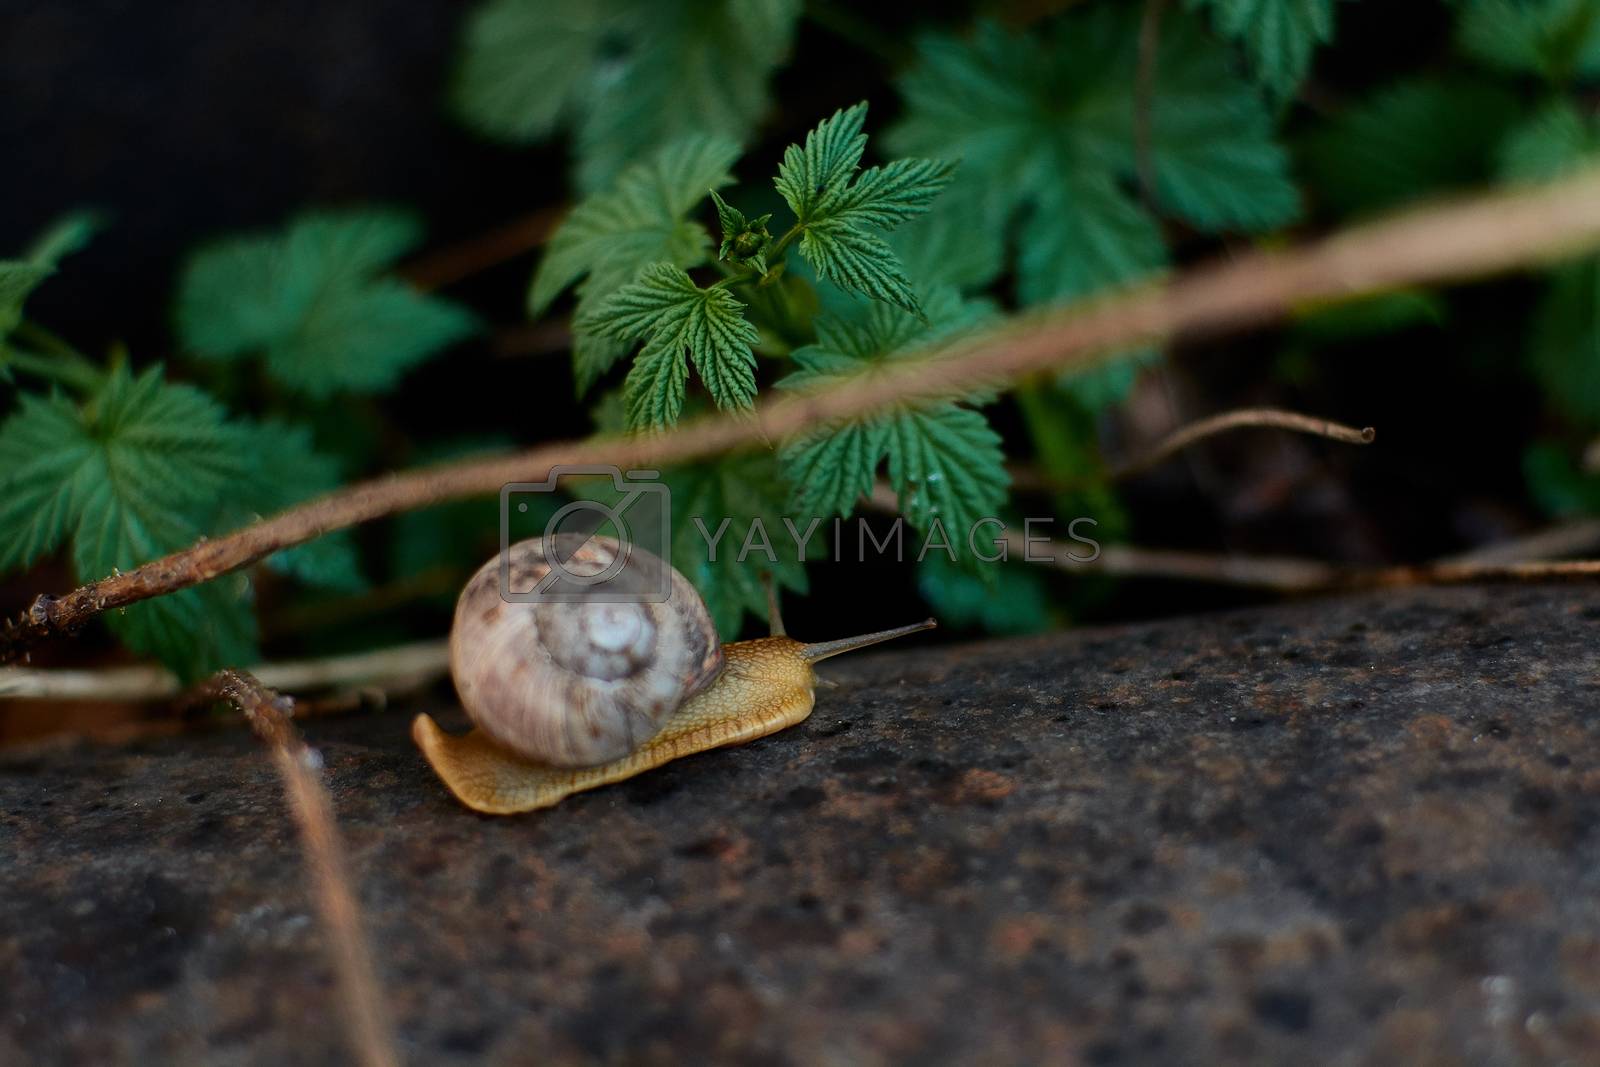 Royalty free image of Snails in the yard after the rain on the green grass with large dew drops. by nixrenas